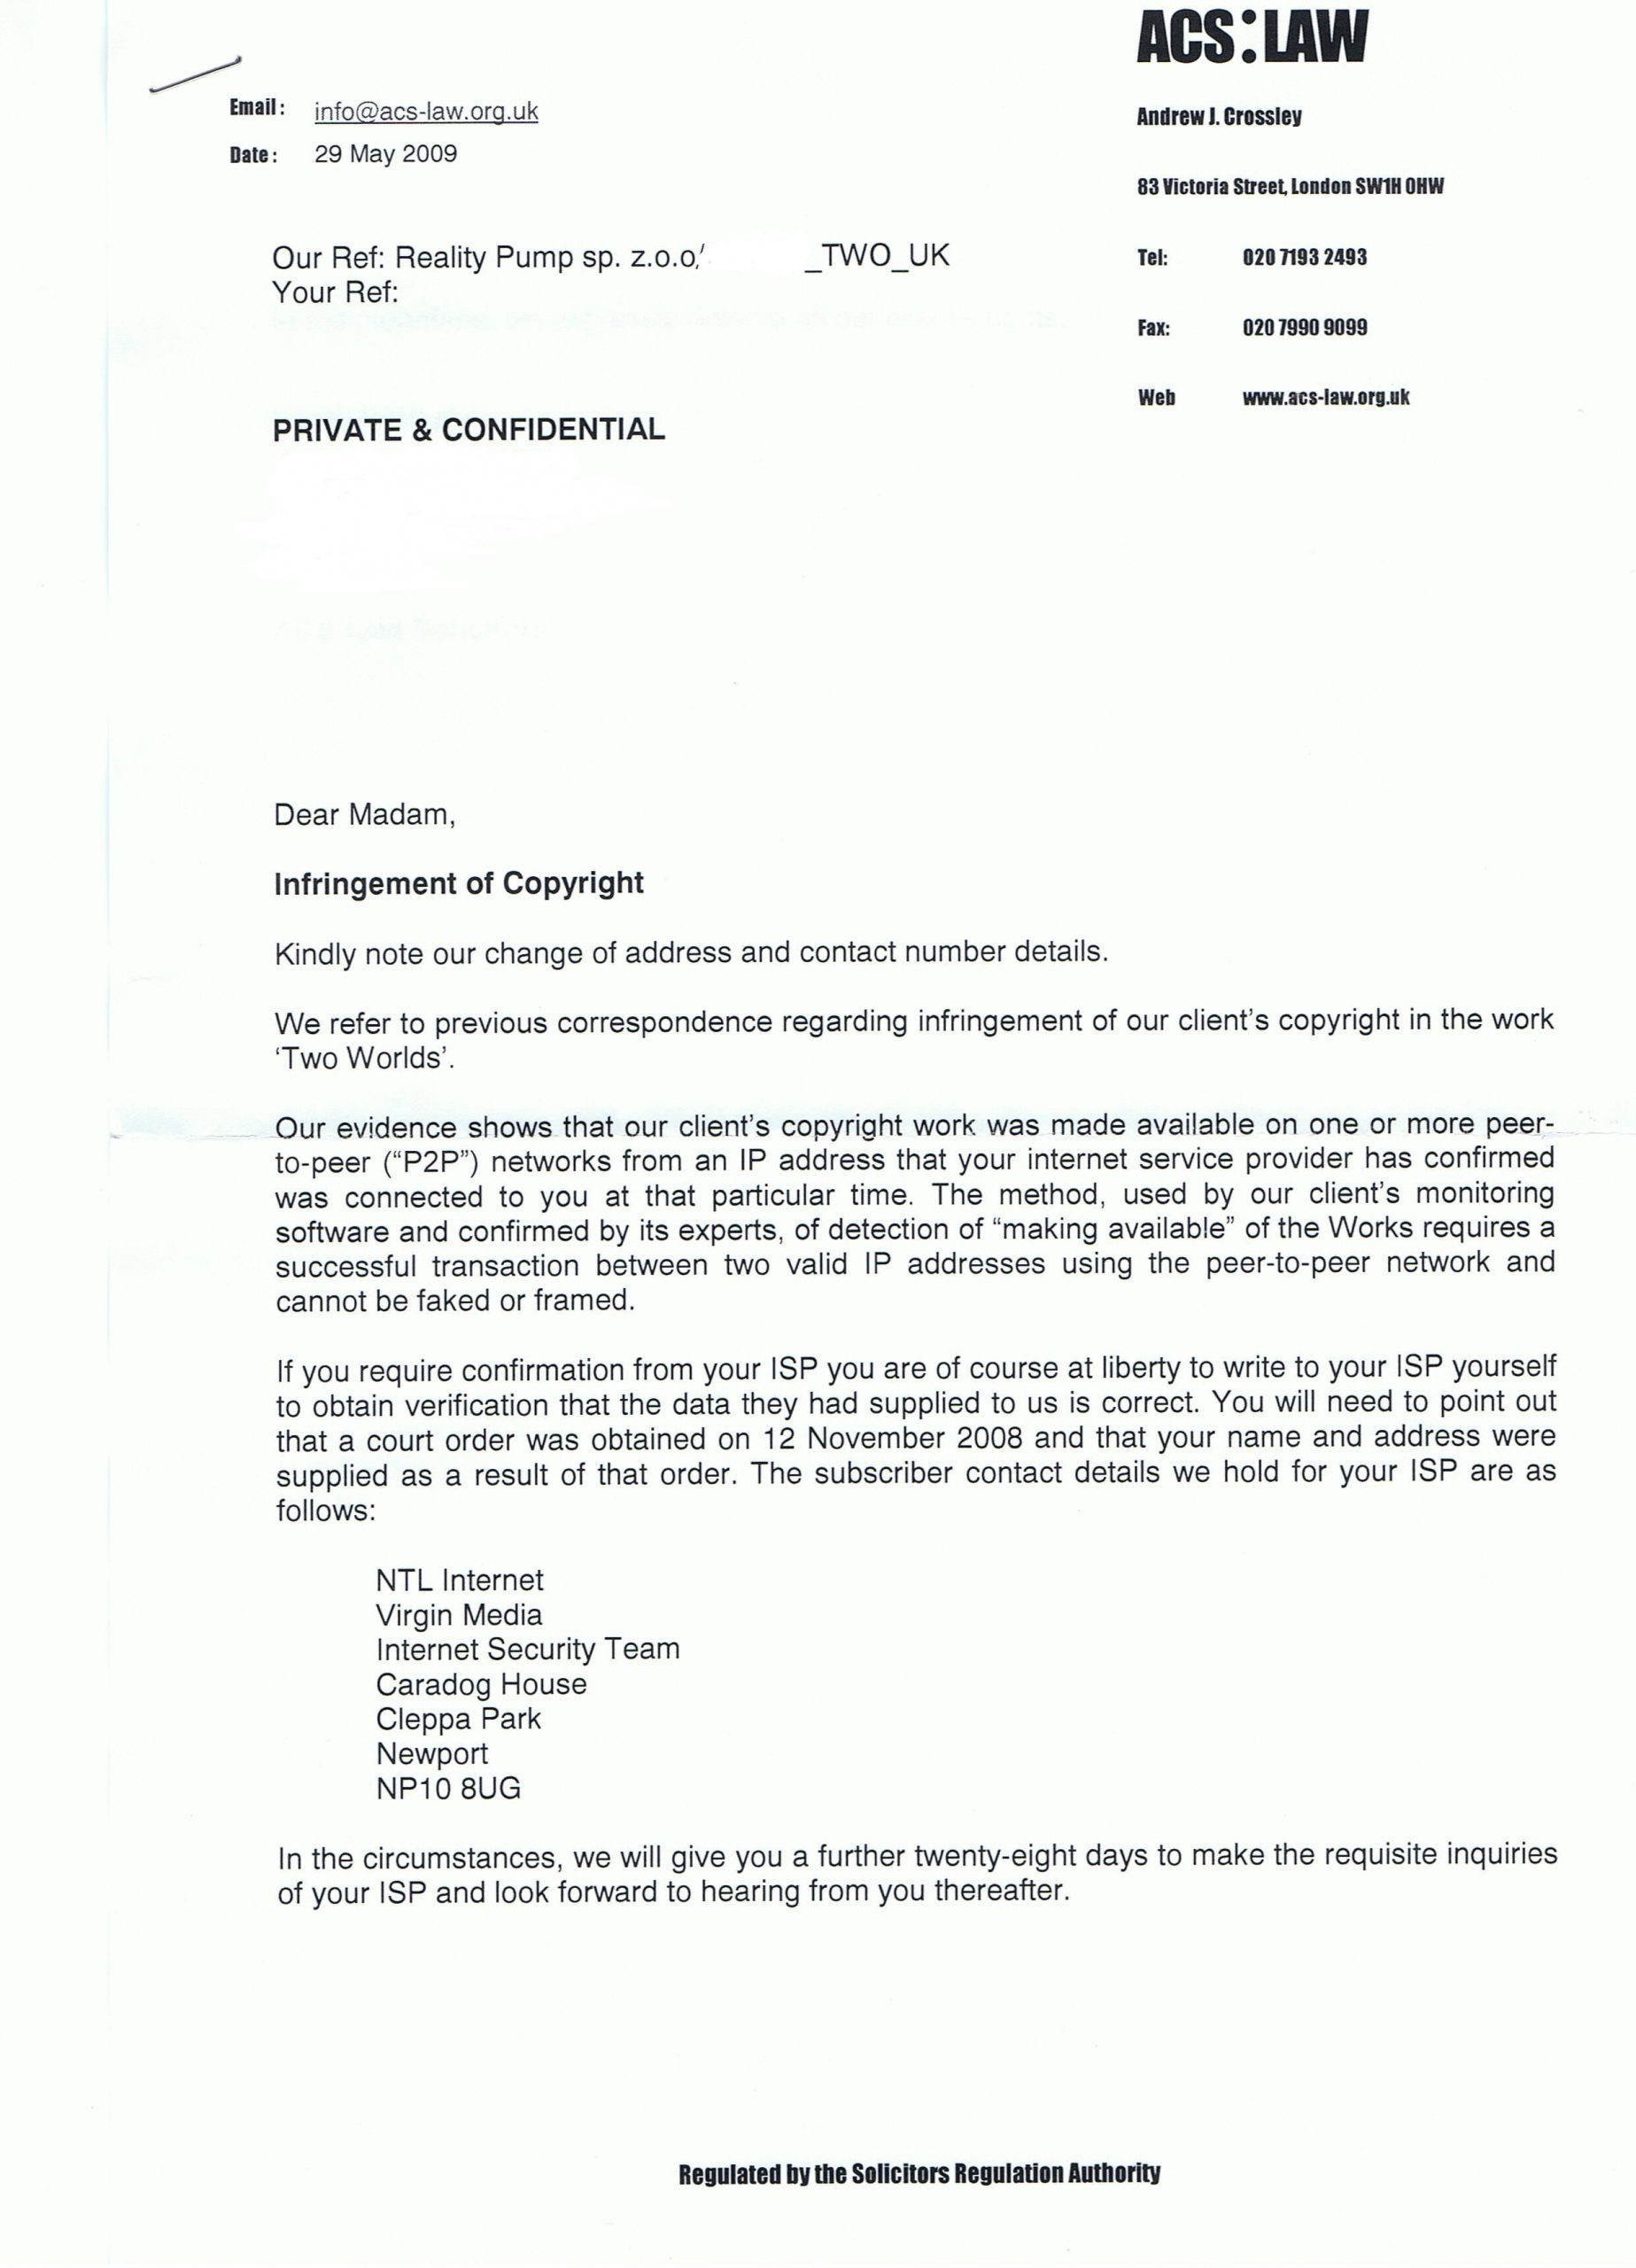 Letter Sample Insurance Claim Denial And Order Example within measurements 2480 X 3437